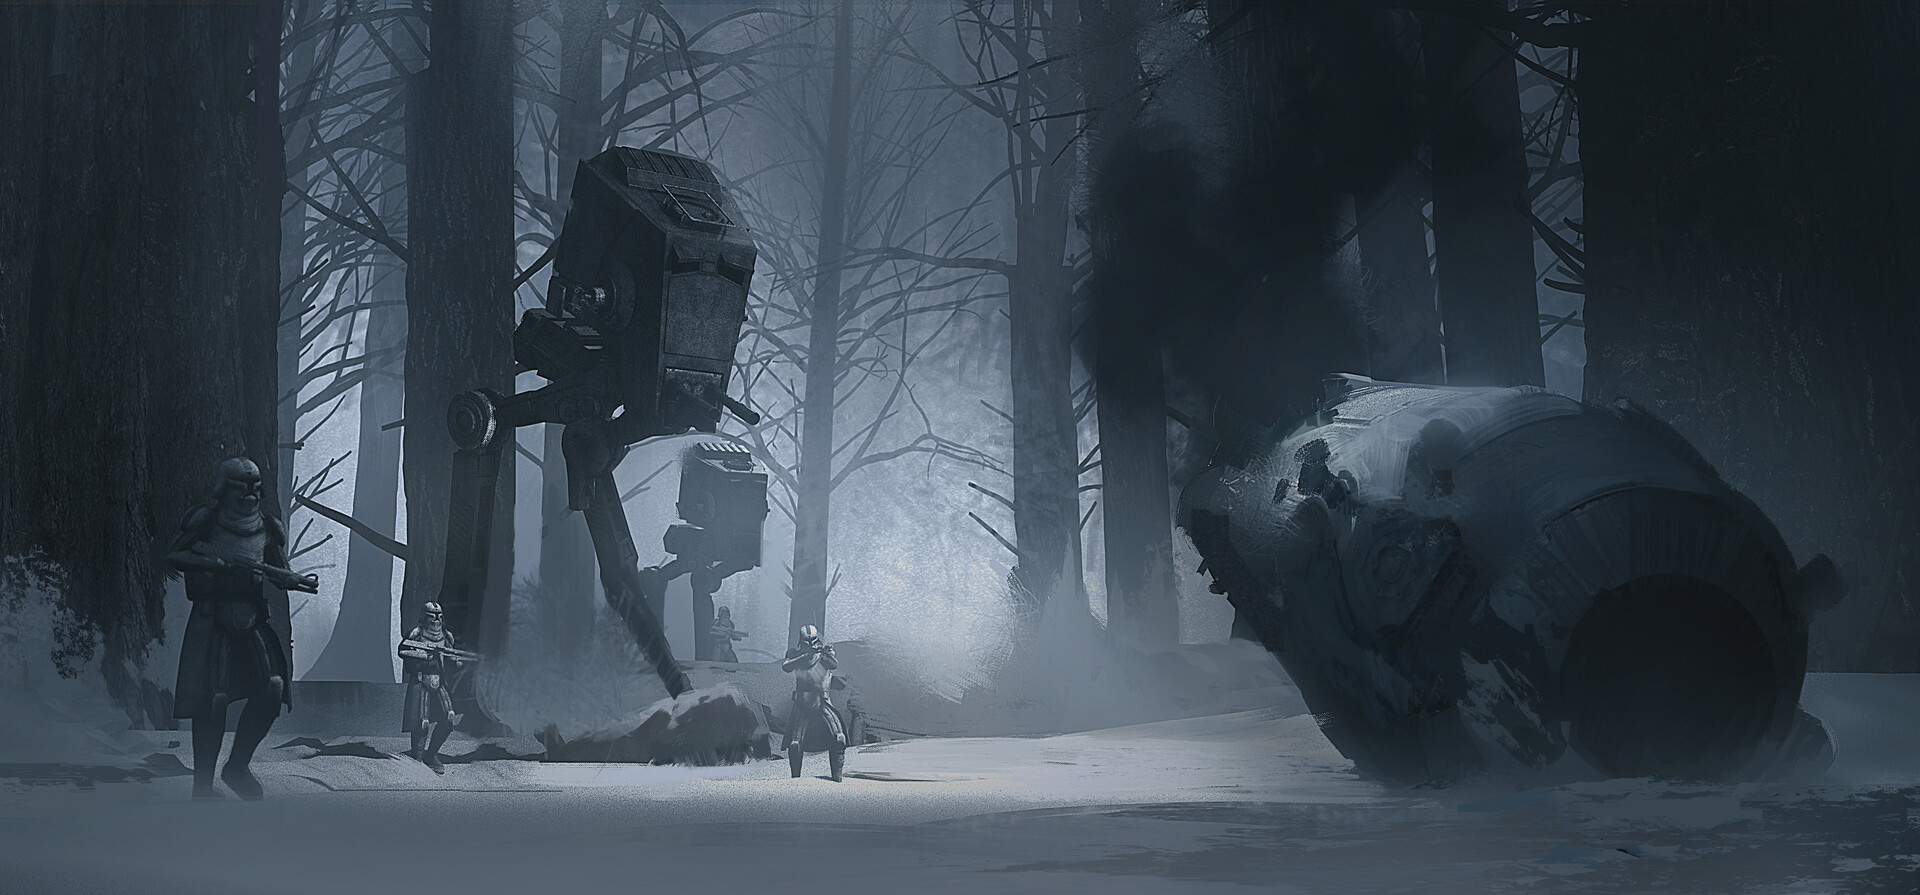 General 1920x895 Star Wars artwork winter snow ice science fiction AT-ST stormtrooper movies